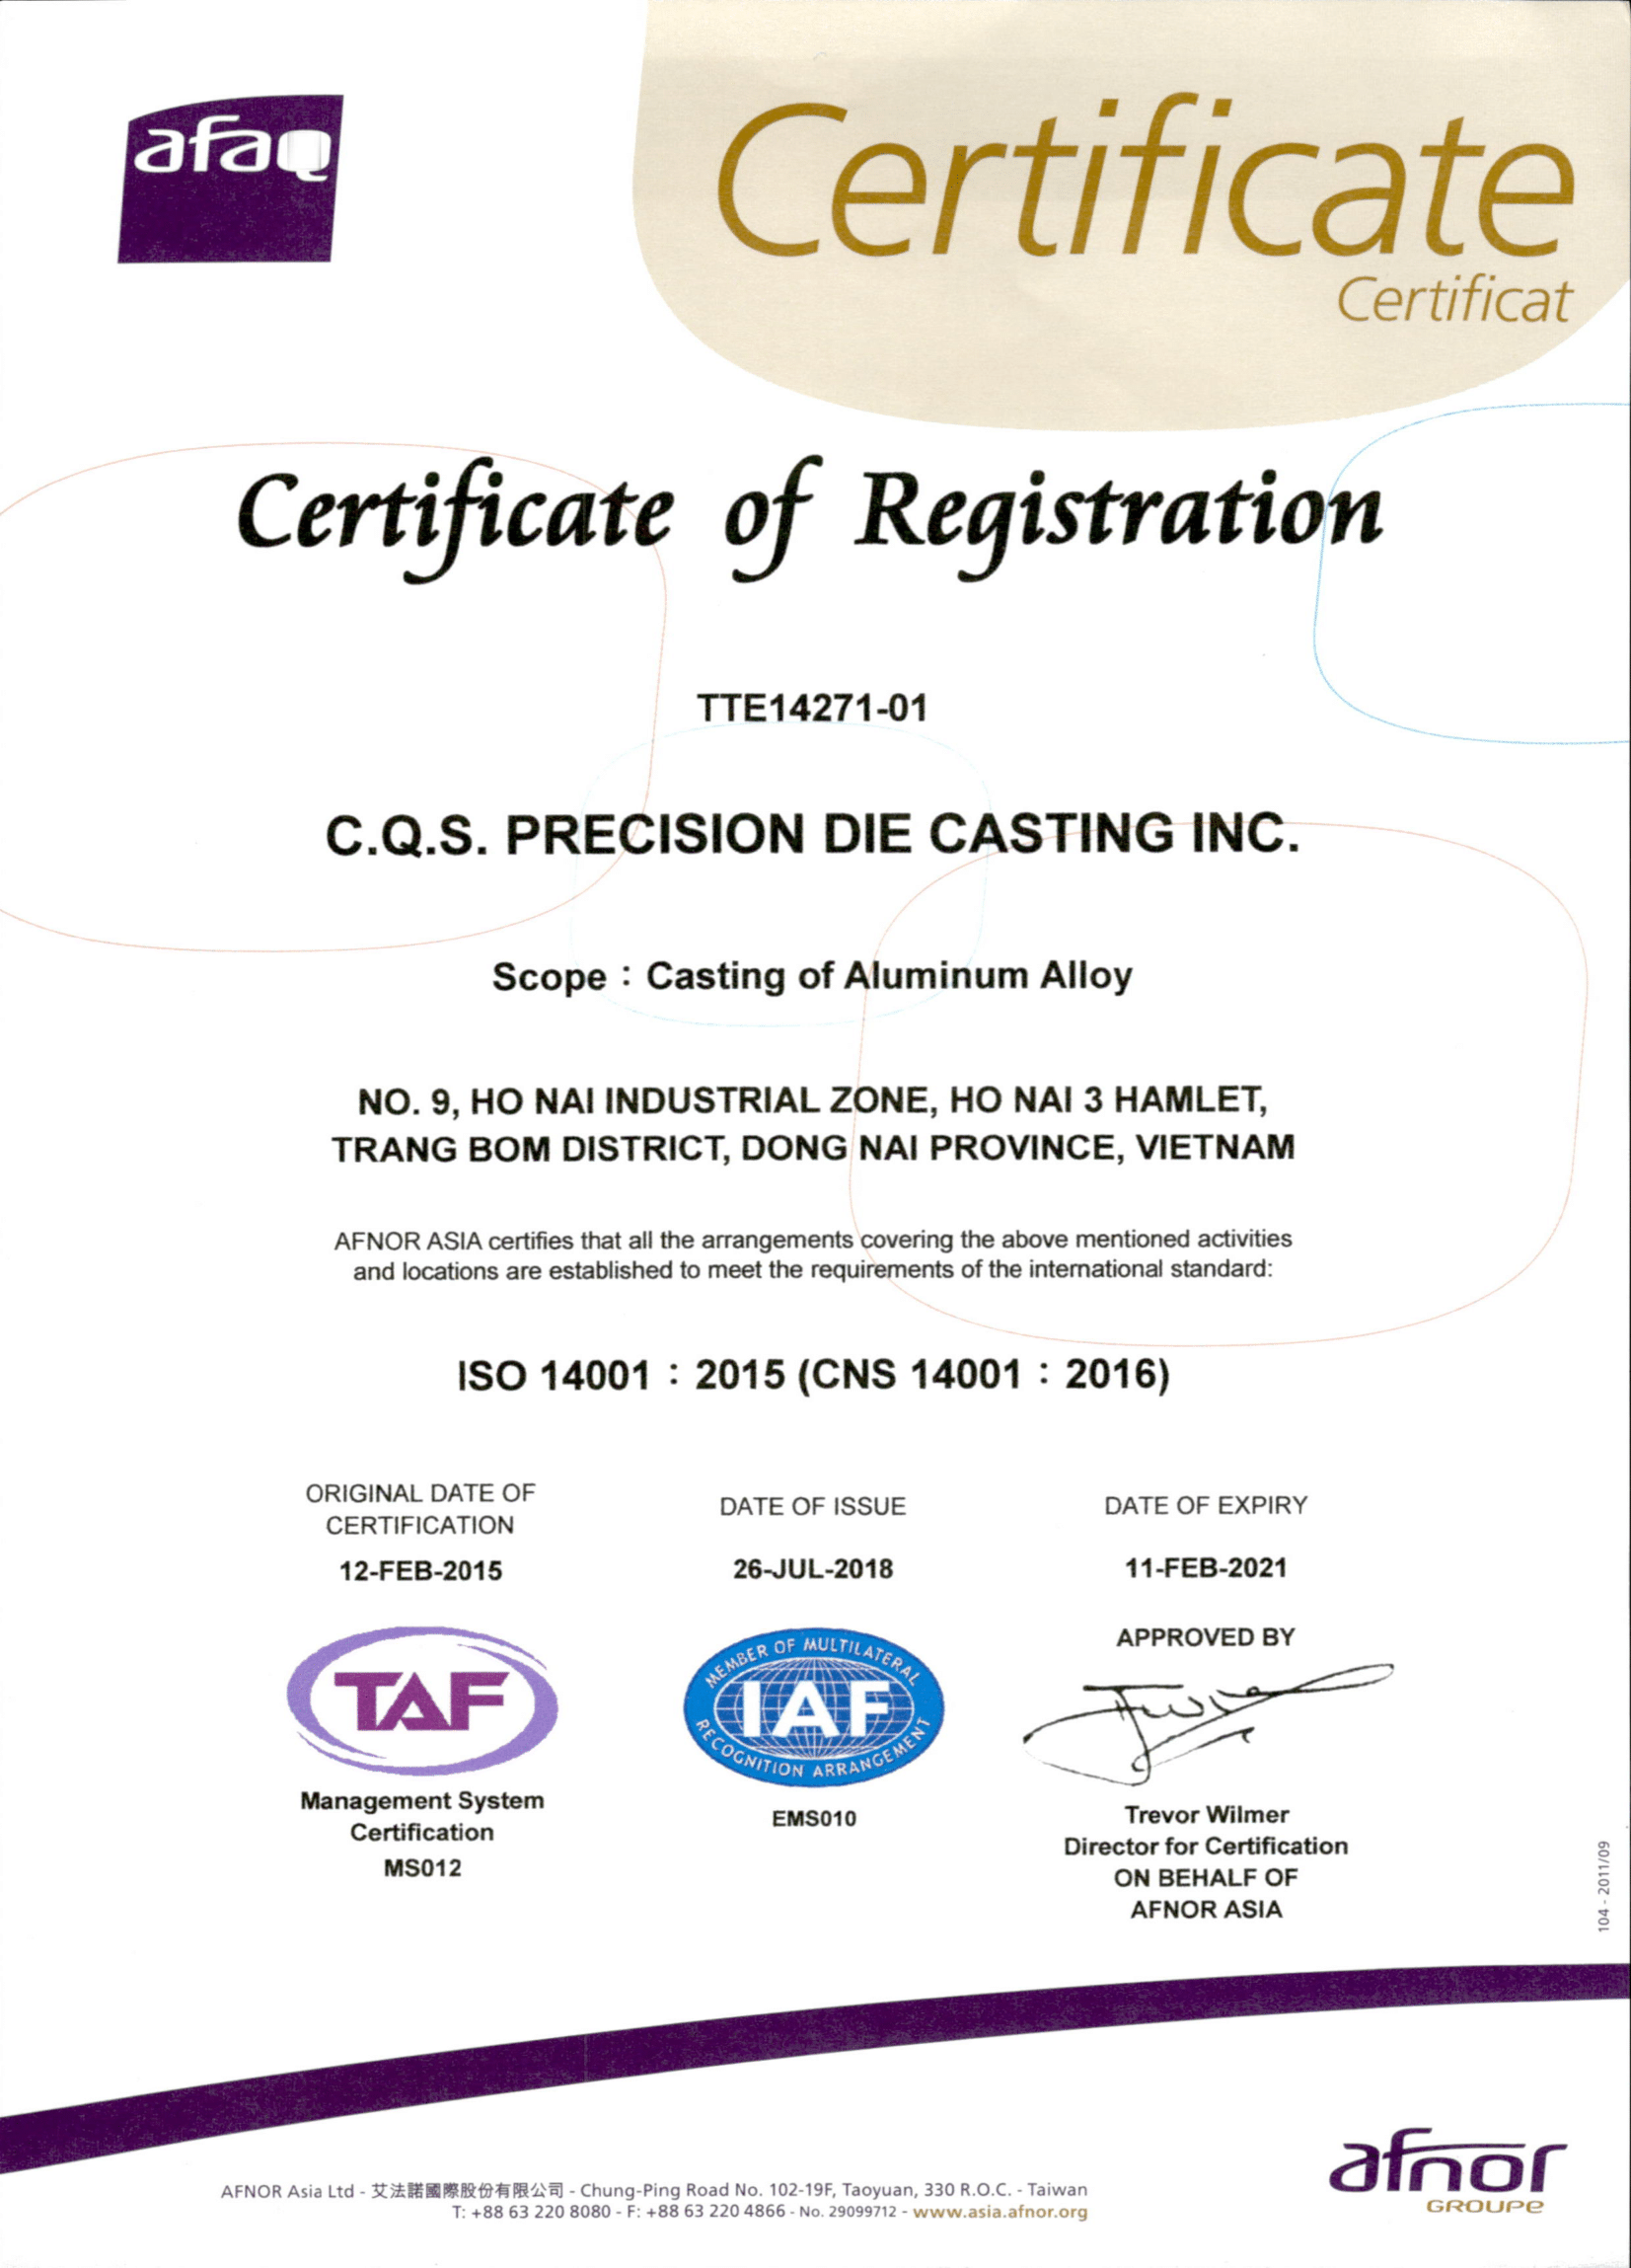 Certificate ISO 14001-2015 (CNS 14001-2016)_Date of expriry 11.Feb.2021-1